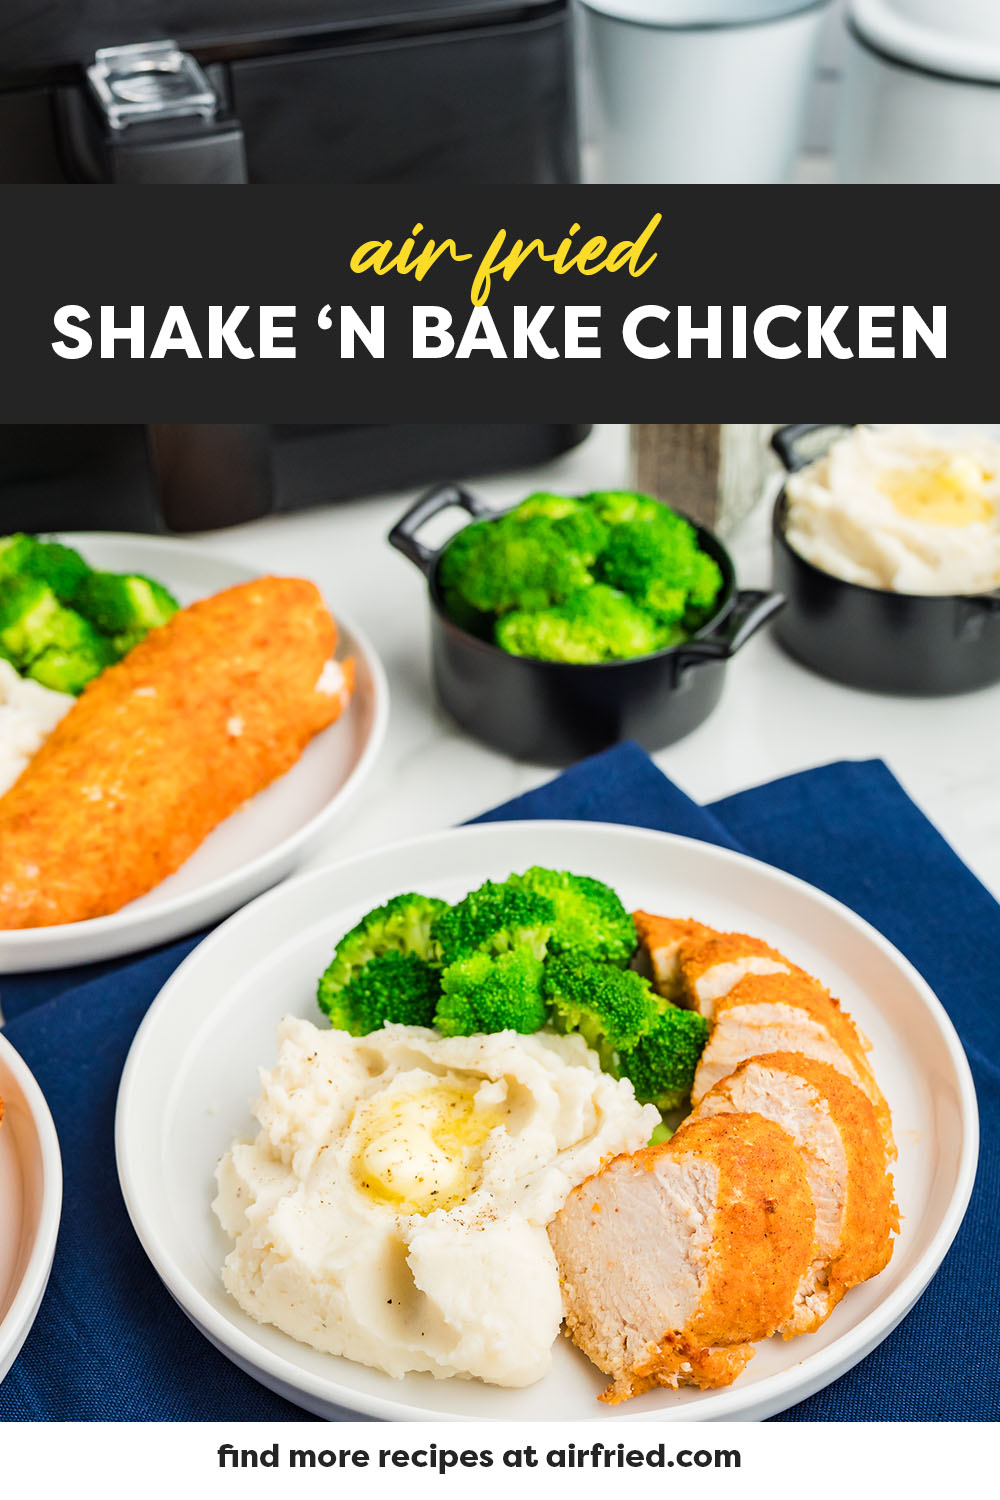 Our Air Fryer Shake and Bake Chicken turns out crispy on the outside, juicy on the inside, and it's ready in just 15 minutes! This is a great time saver and has that classic crispy flavor that we all grew up enjoying!